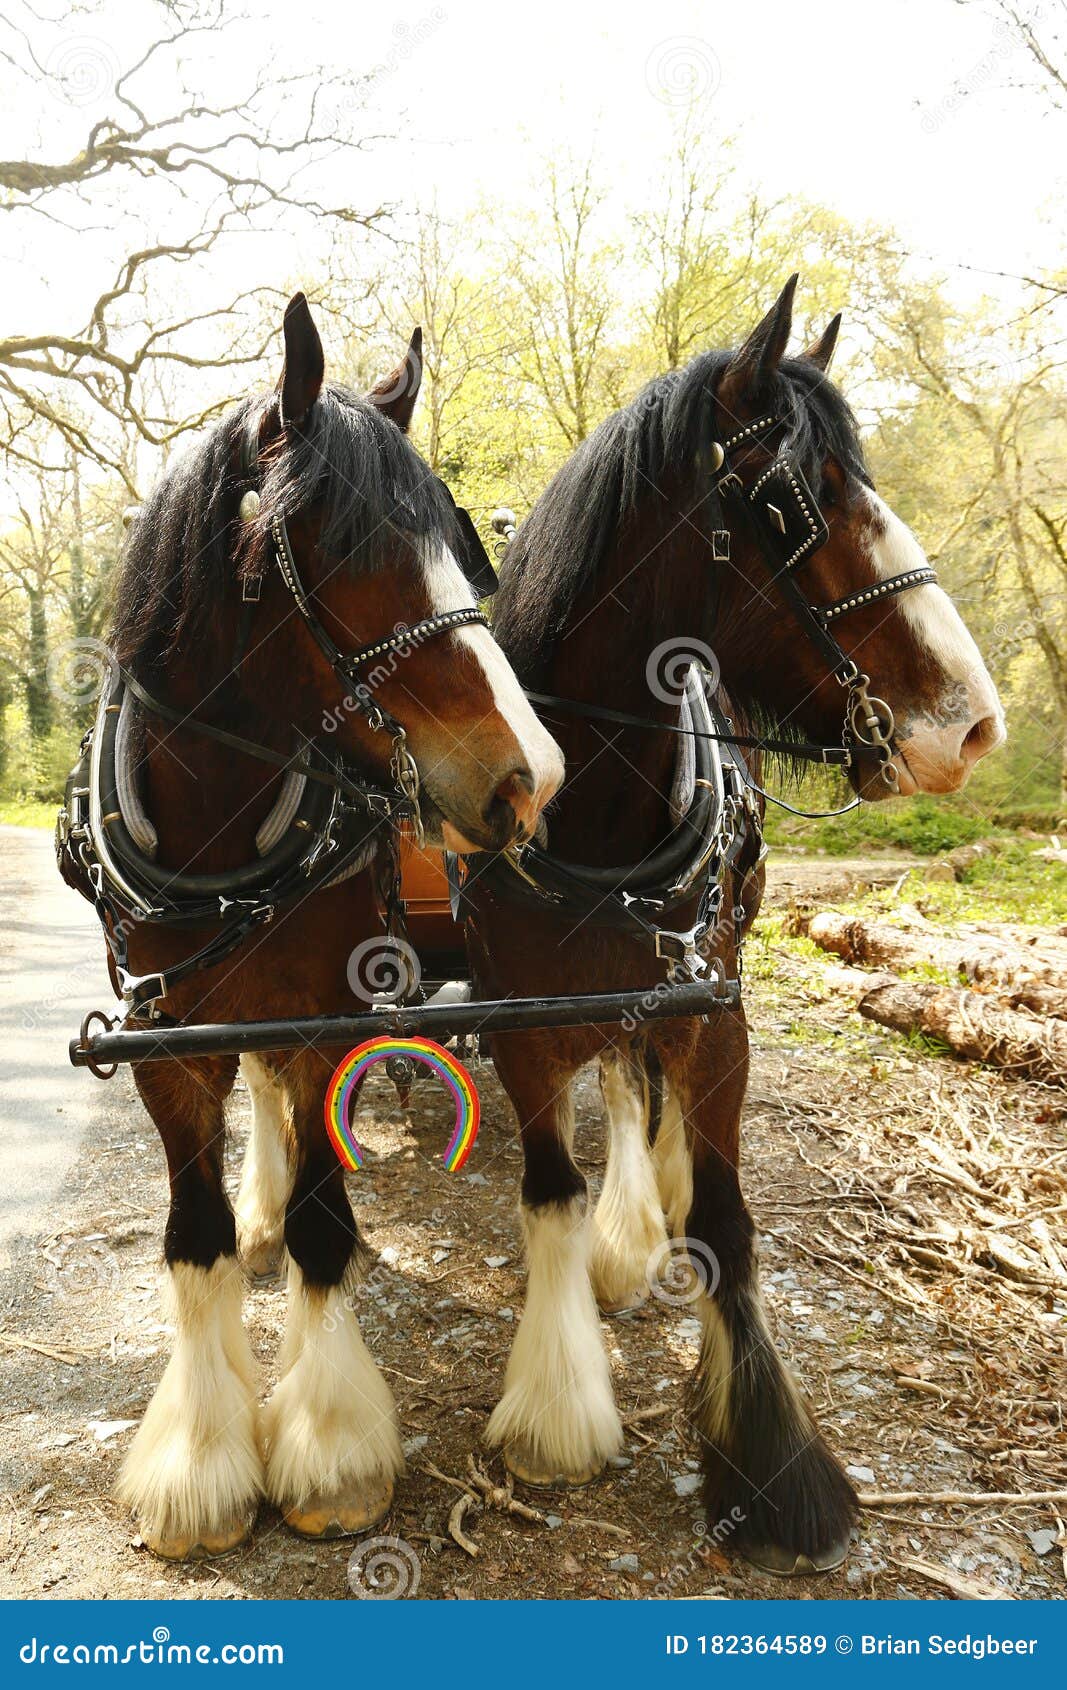 pair of shire horses harnessed together with the nhs rainbow colours on a horse shoe attached to their harness